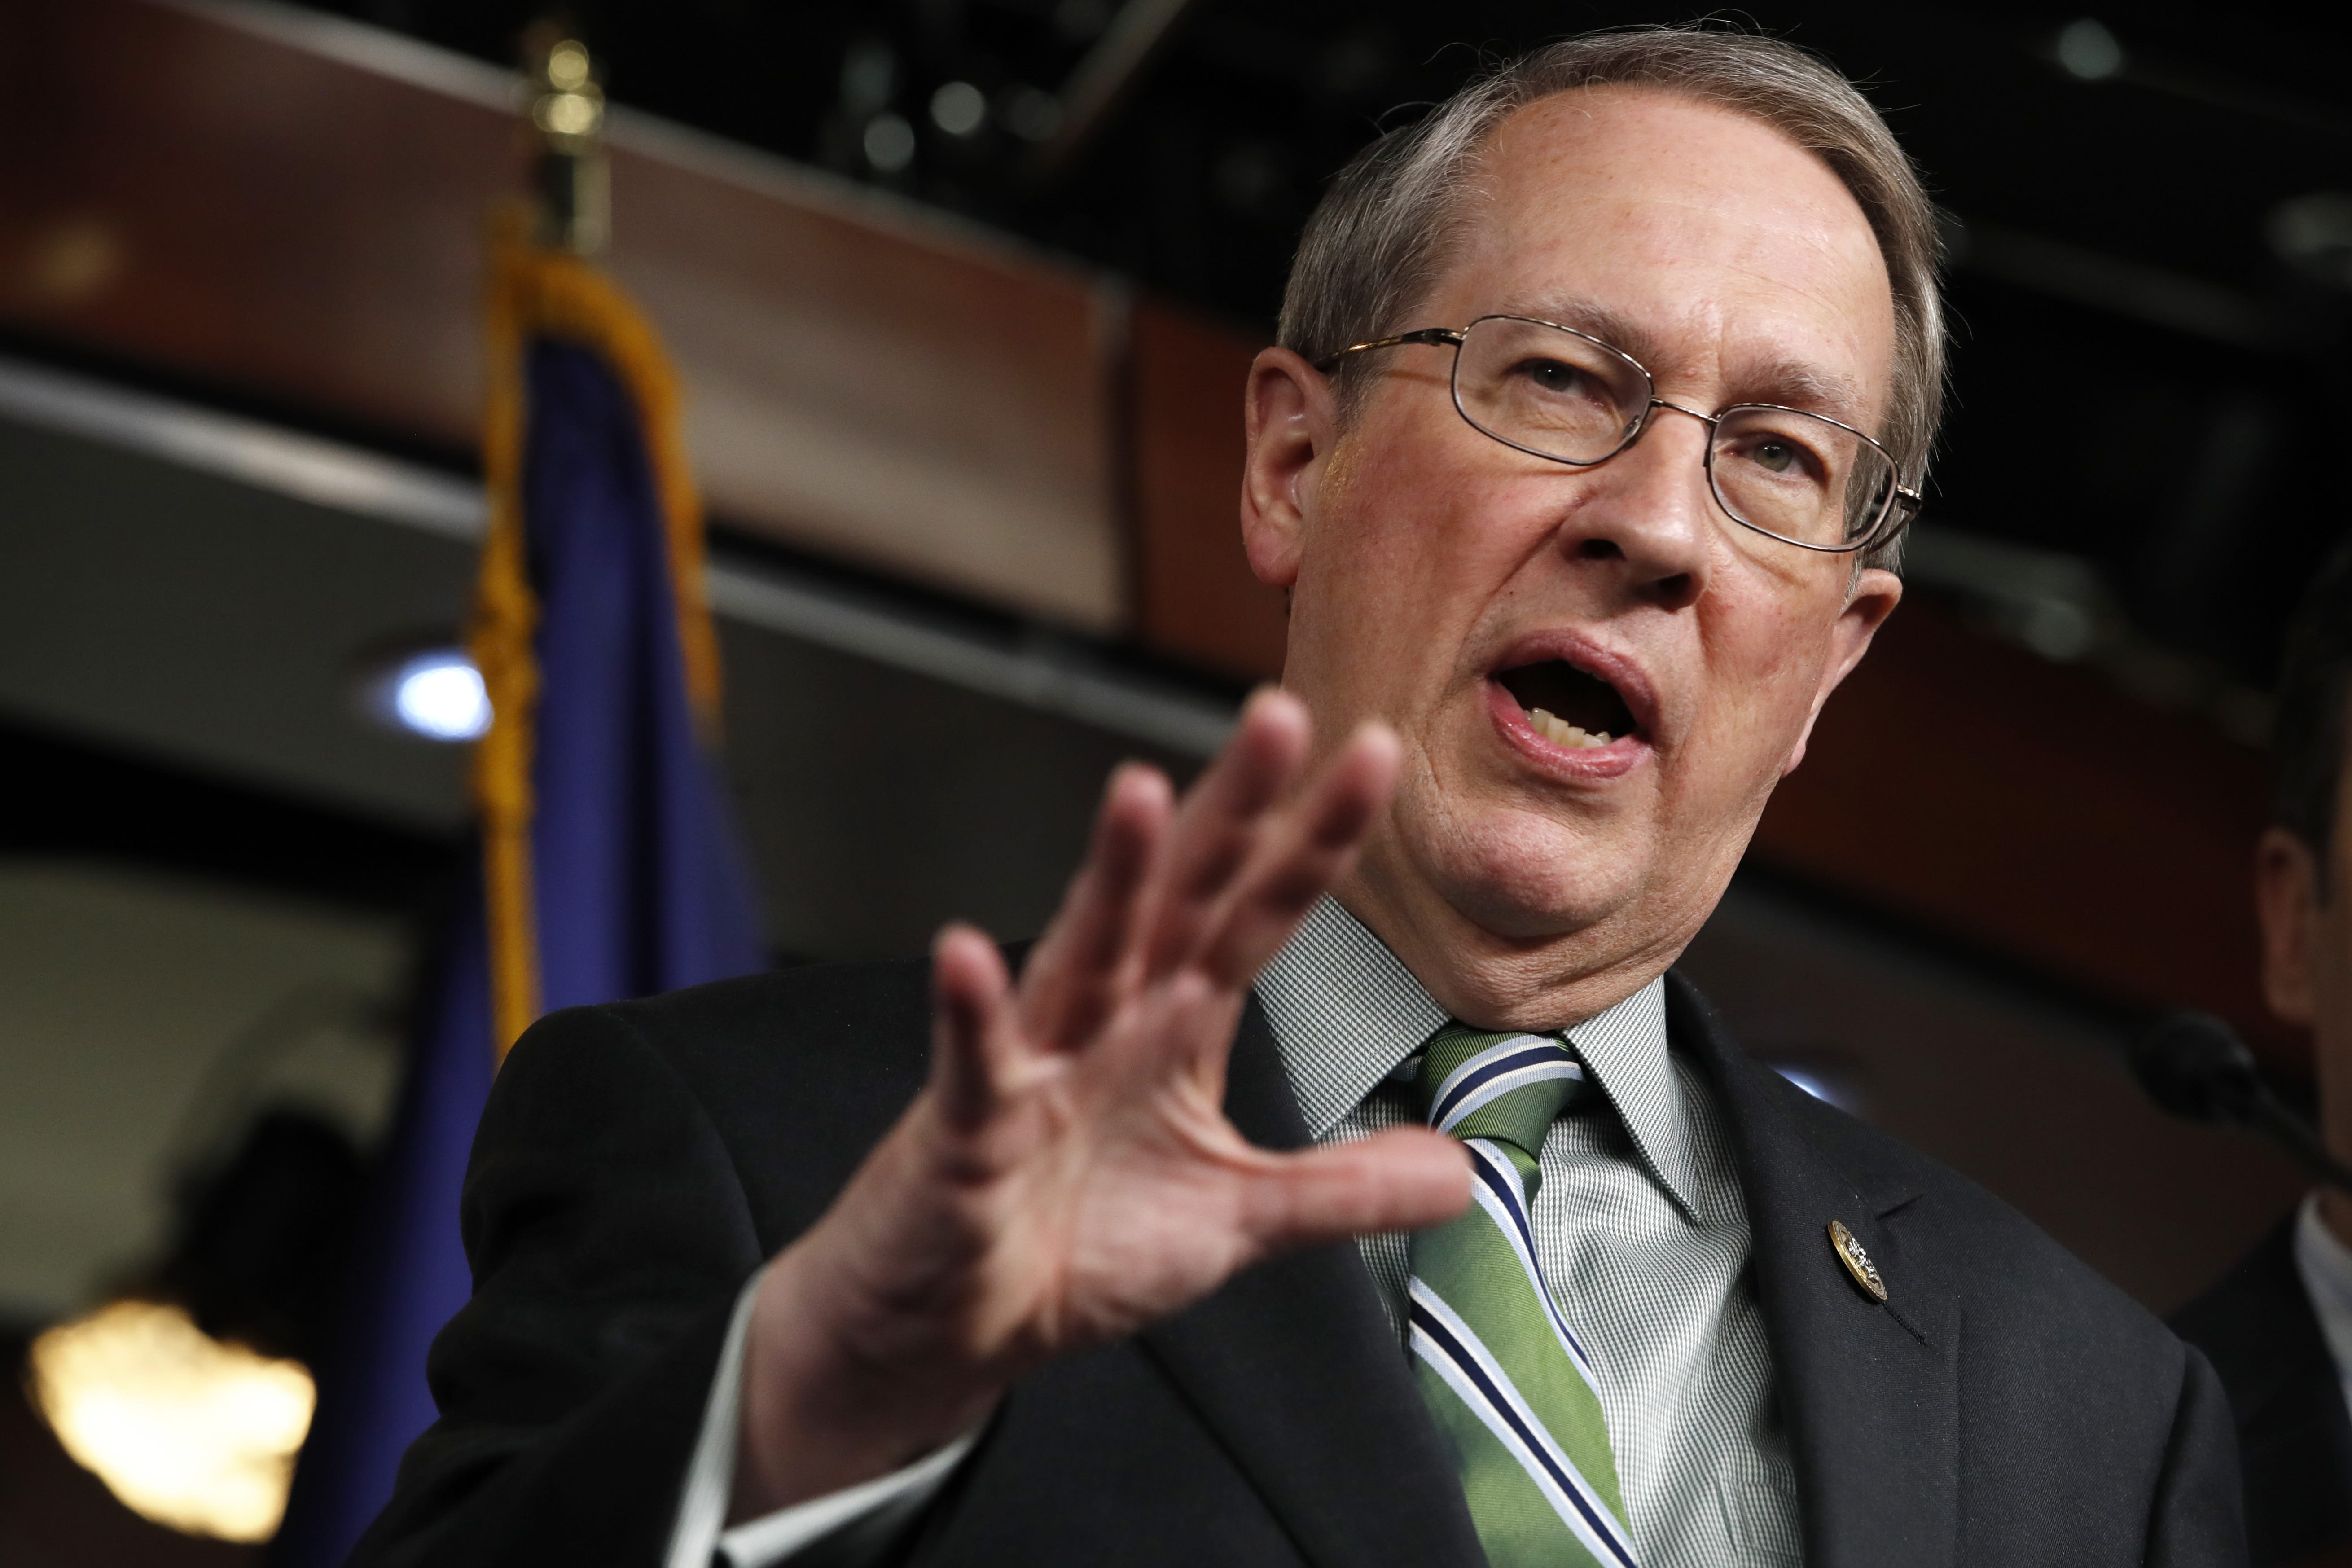 House Judiciary Committee Chairman Rep. Bob Goodlatte, R-Va., speaks about immigration, Wednesday, Jan. 10, 2018, on Capitol Hill in Washington. The news conference was on Goodlatte's immigration bill that would impact recipients of the Deferred Action for Childhood Arrivals (DACA) program.